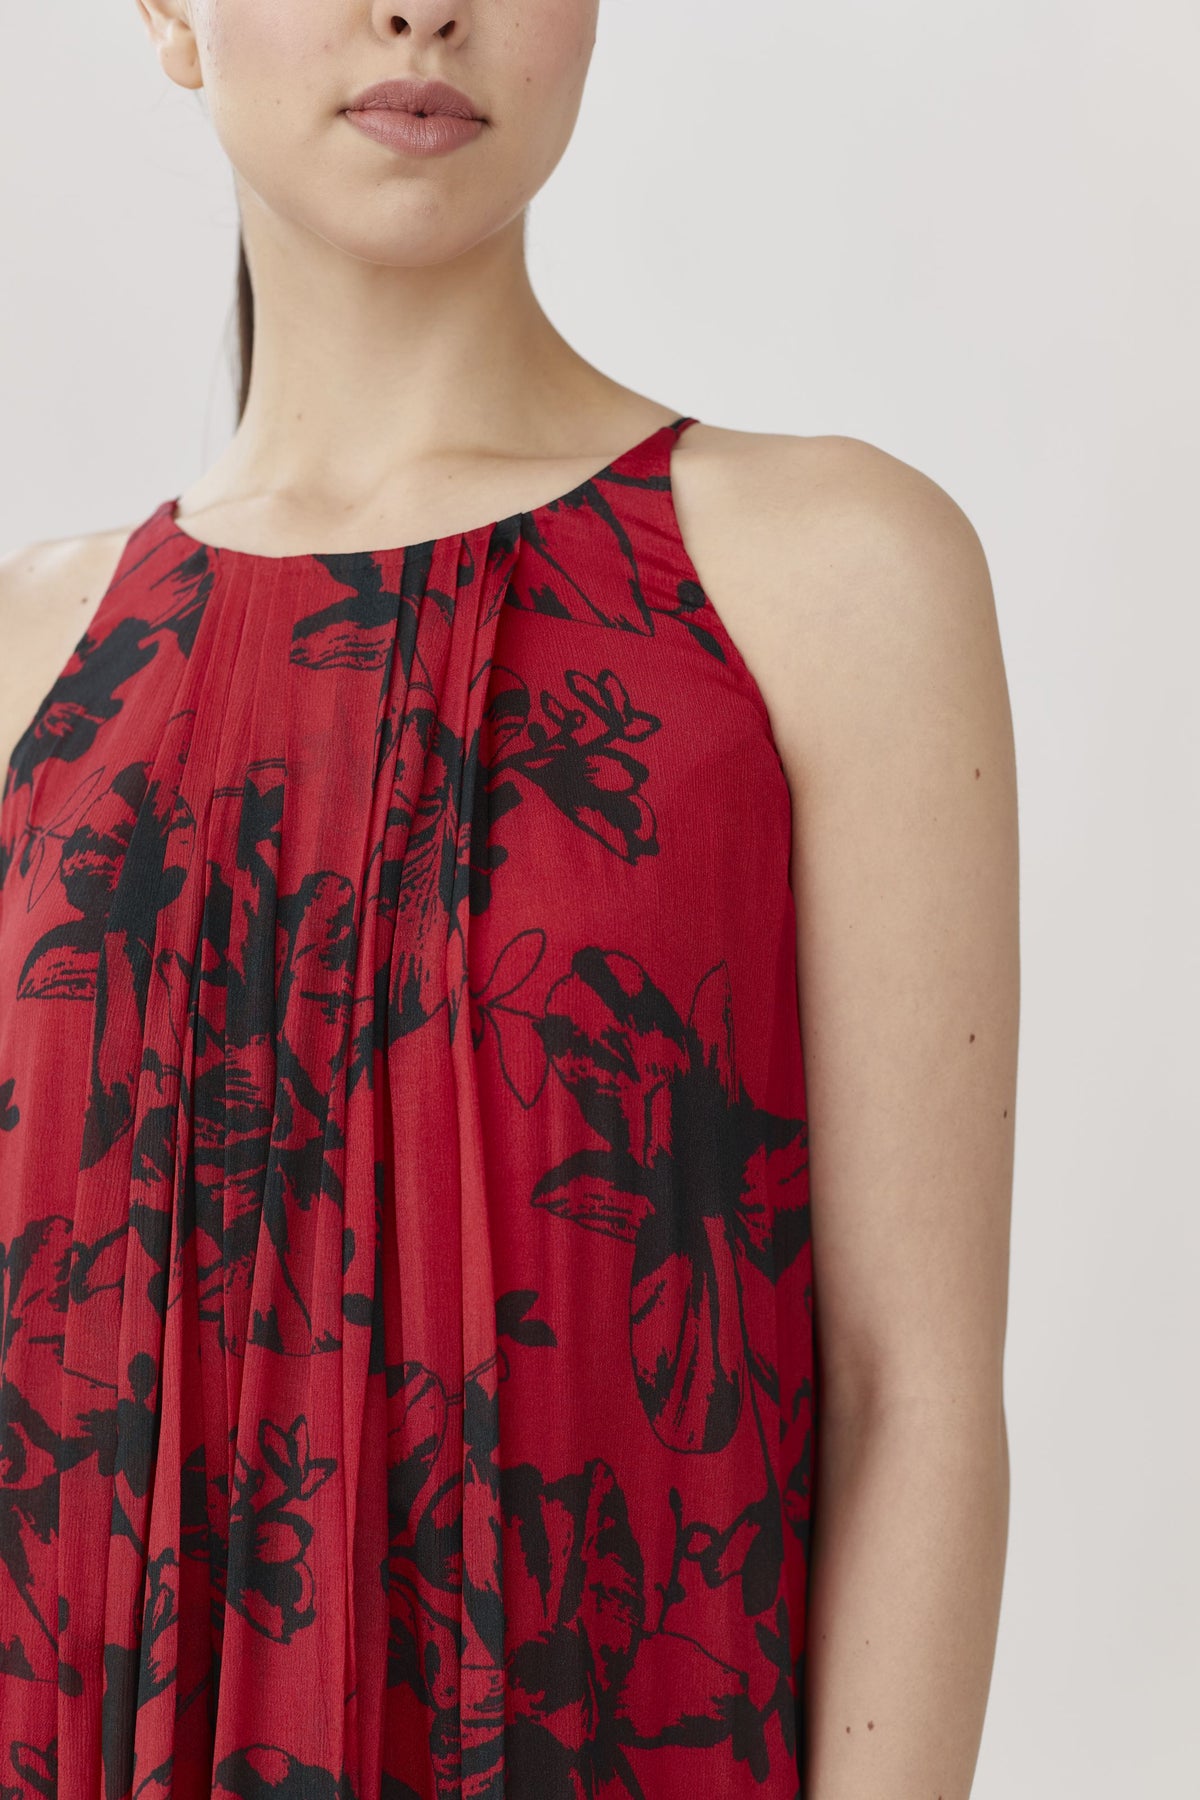 RED FLORAL LONG DRESS